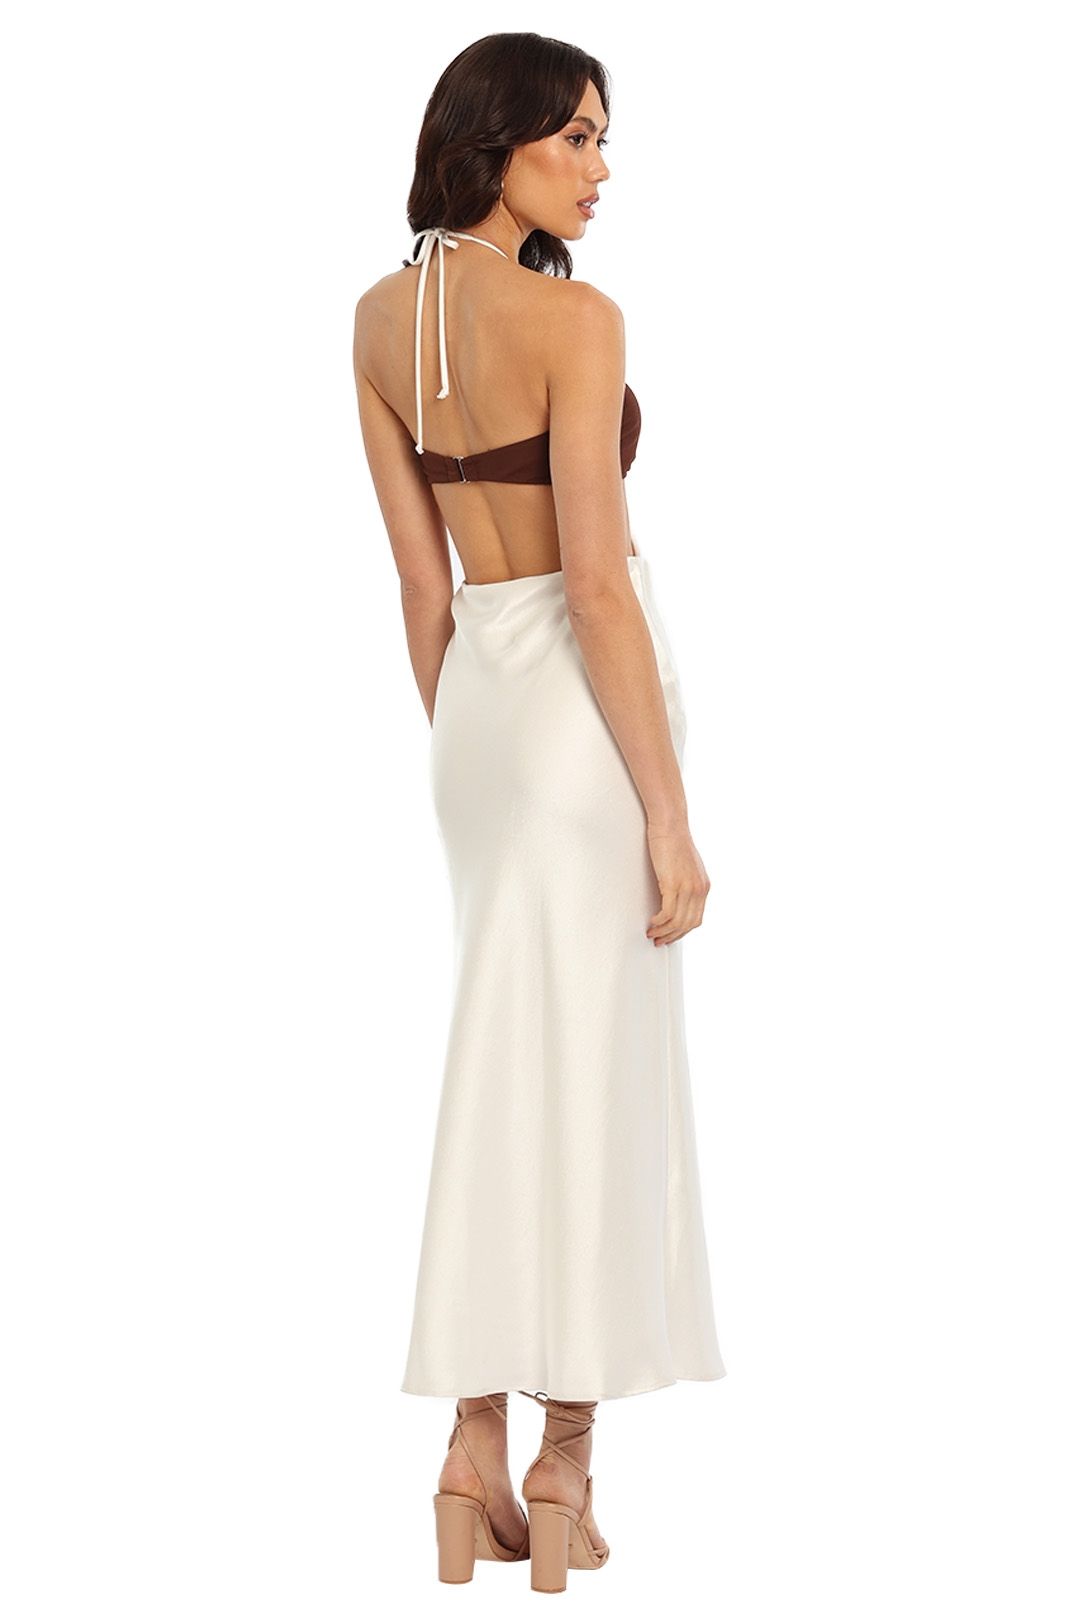 Bec and Bridge Nadia Cut Out Dress White Backless